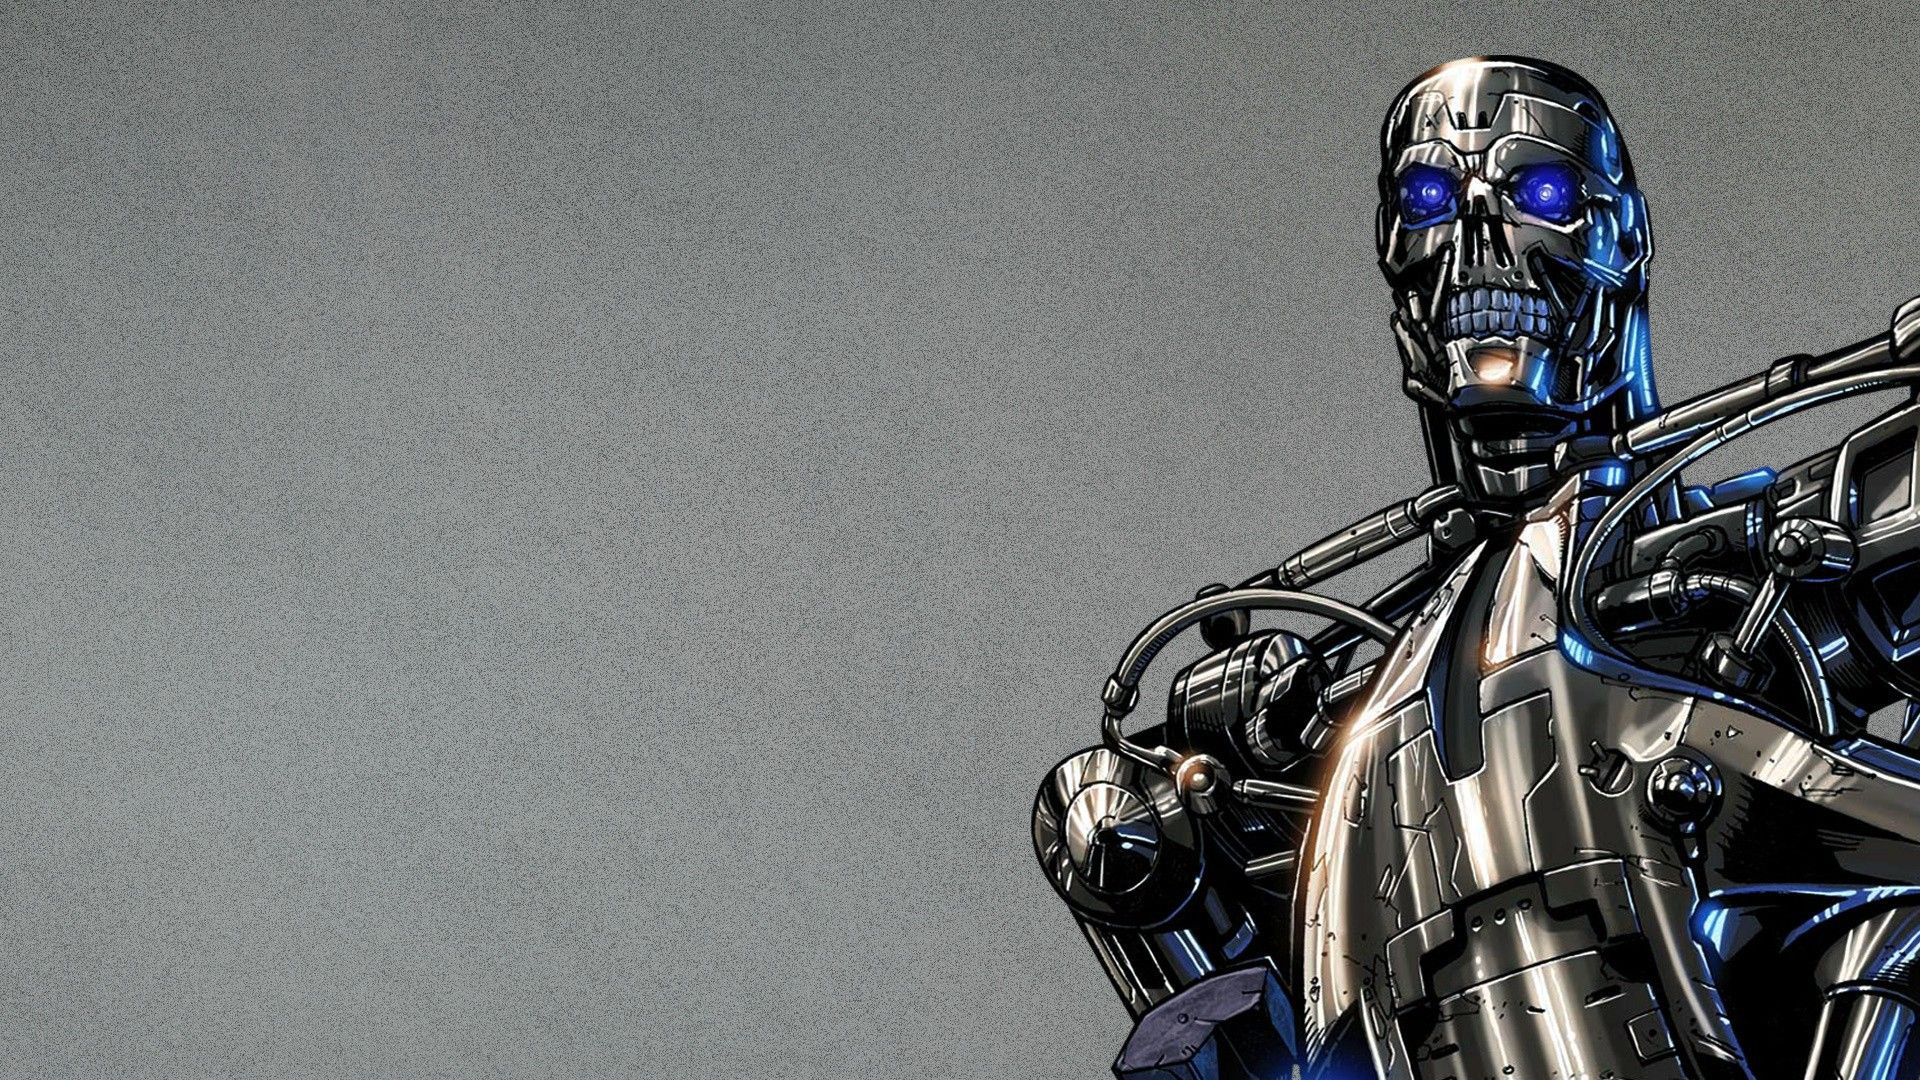 Robot, Terminator wallpaper and image, picture, photo